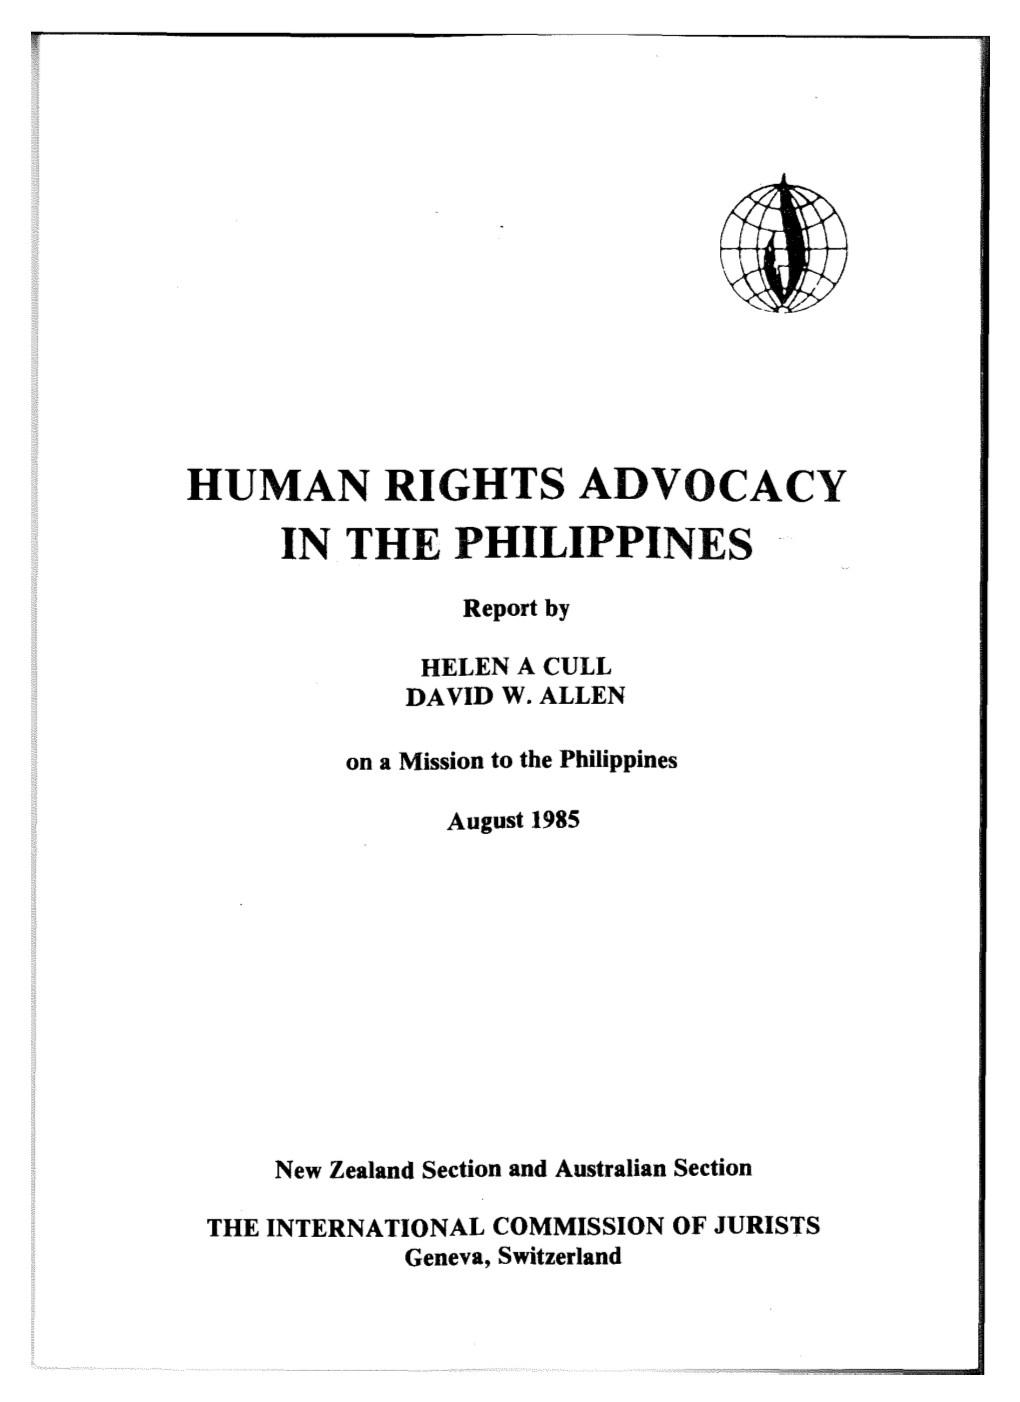 HUMAN RIGHTS ADVOCACY in the PHILIPPINES Report by HELEN a CULL DAVID W